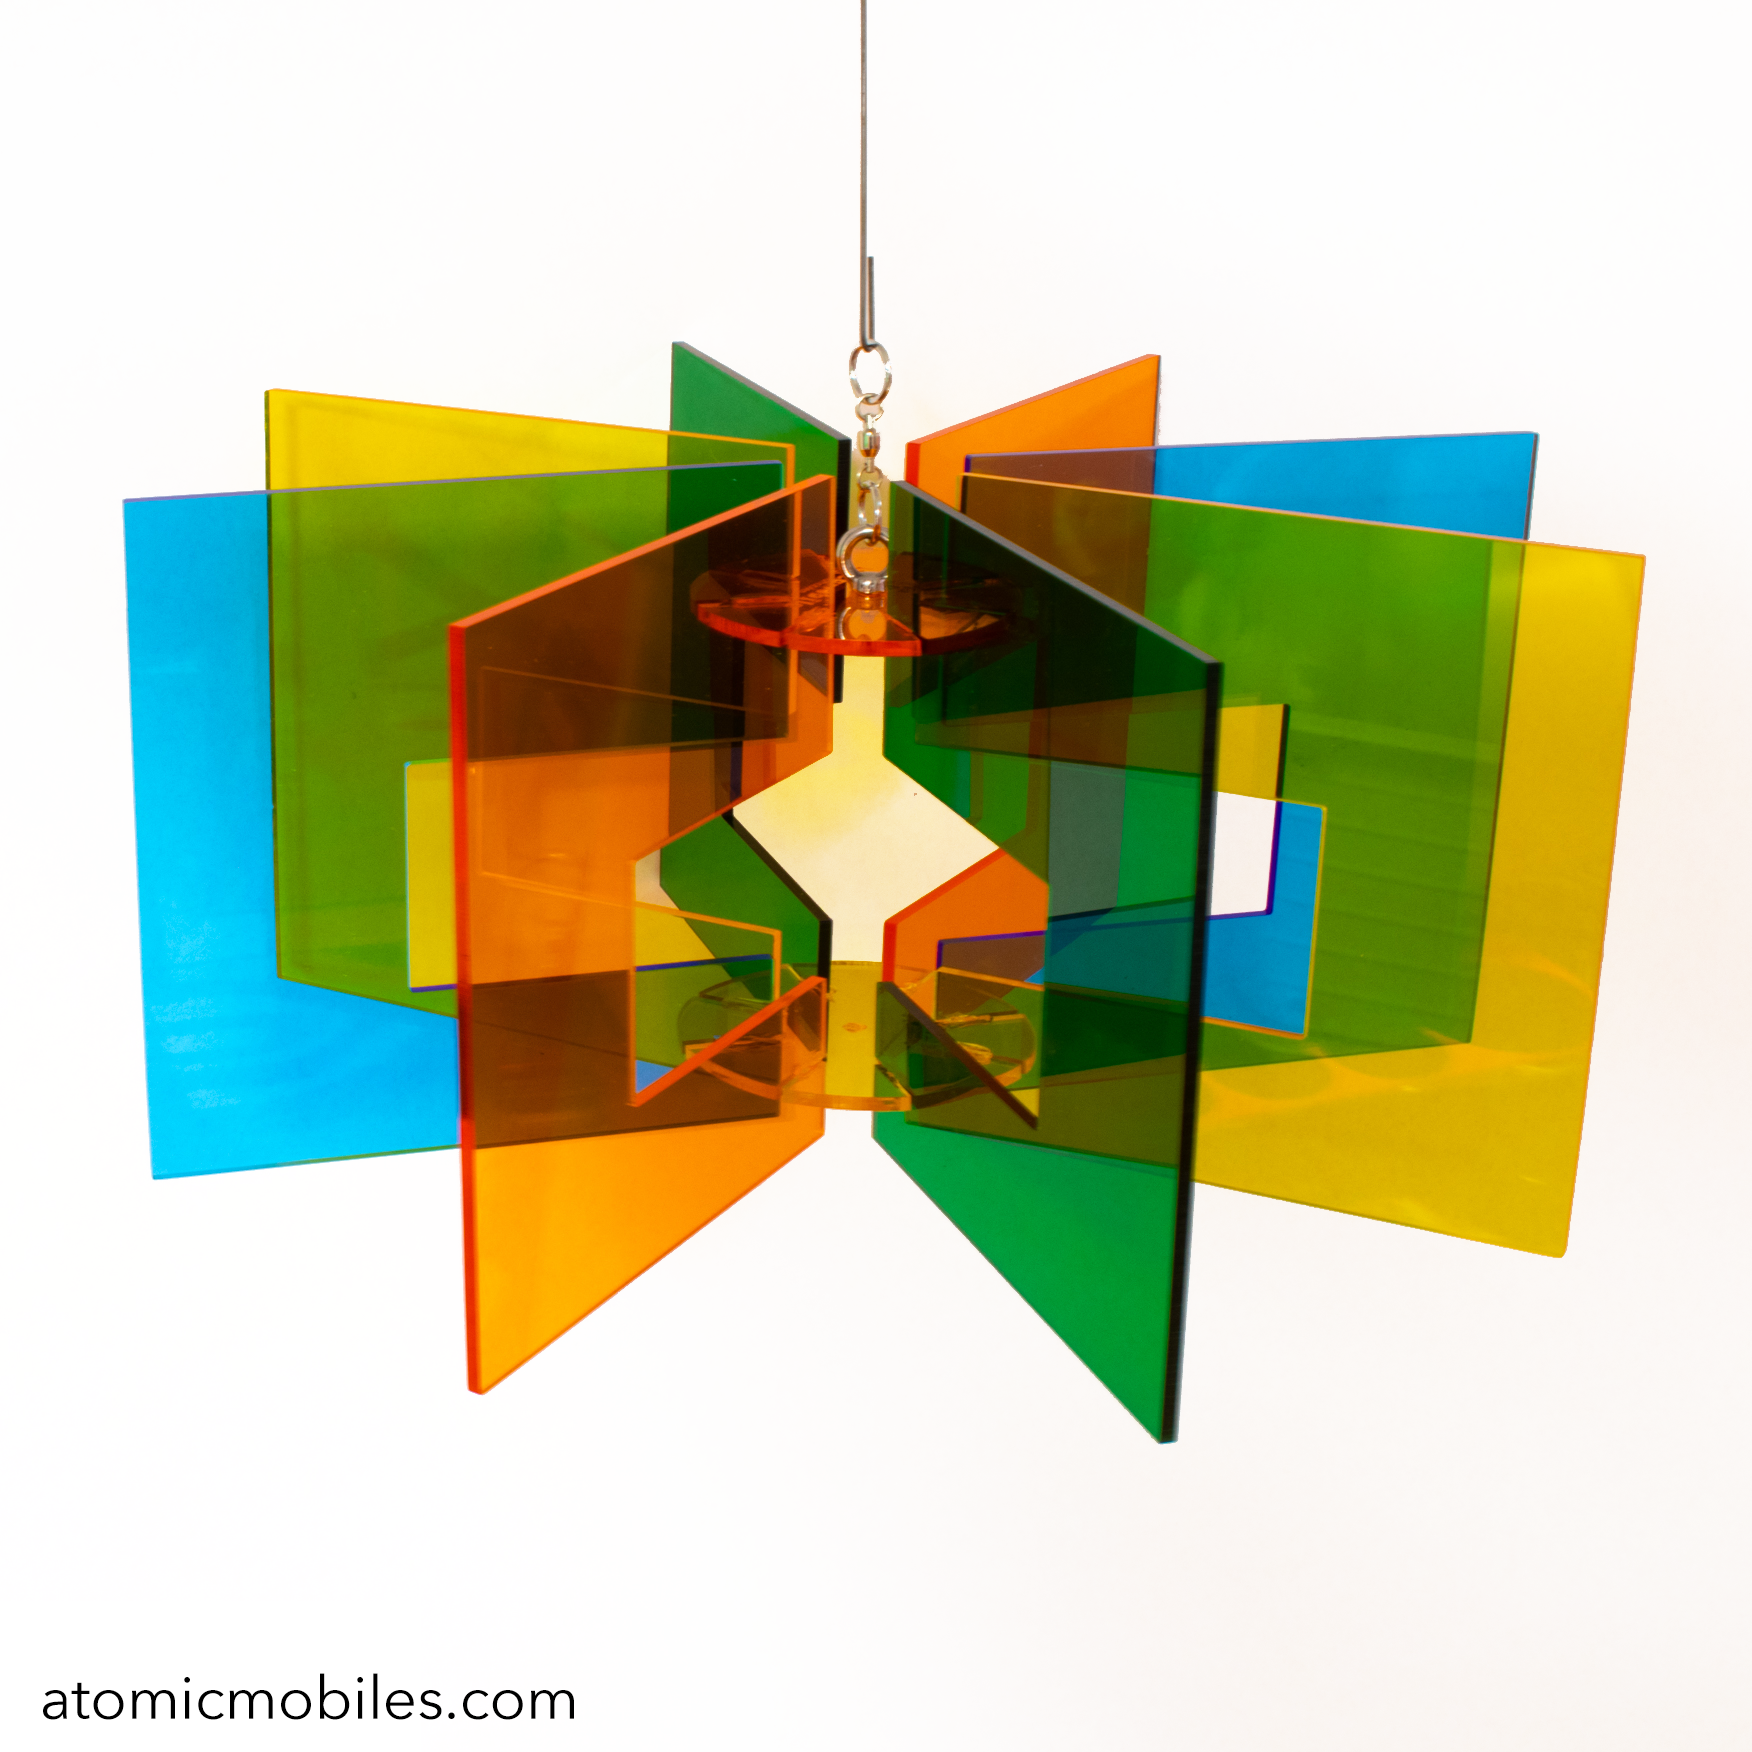 Space Age RotaMobile - Beautiful rotating kinetic hanging art mobile in clear acrylic colors of Orange, Yellow, Blue and Green by AtomicMobiles.com